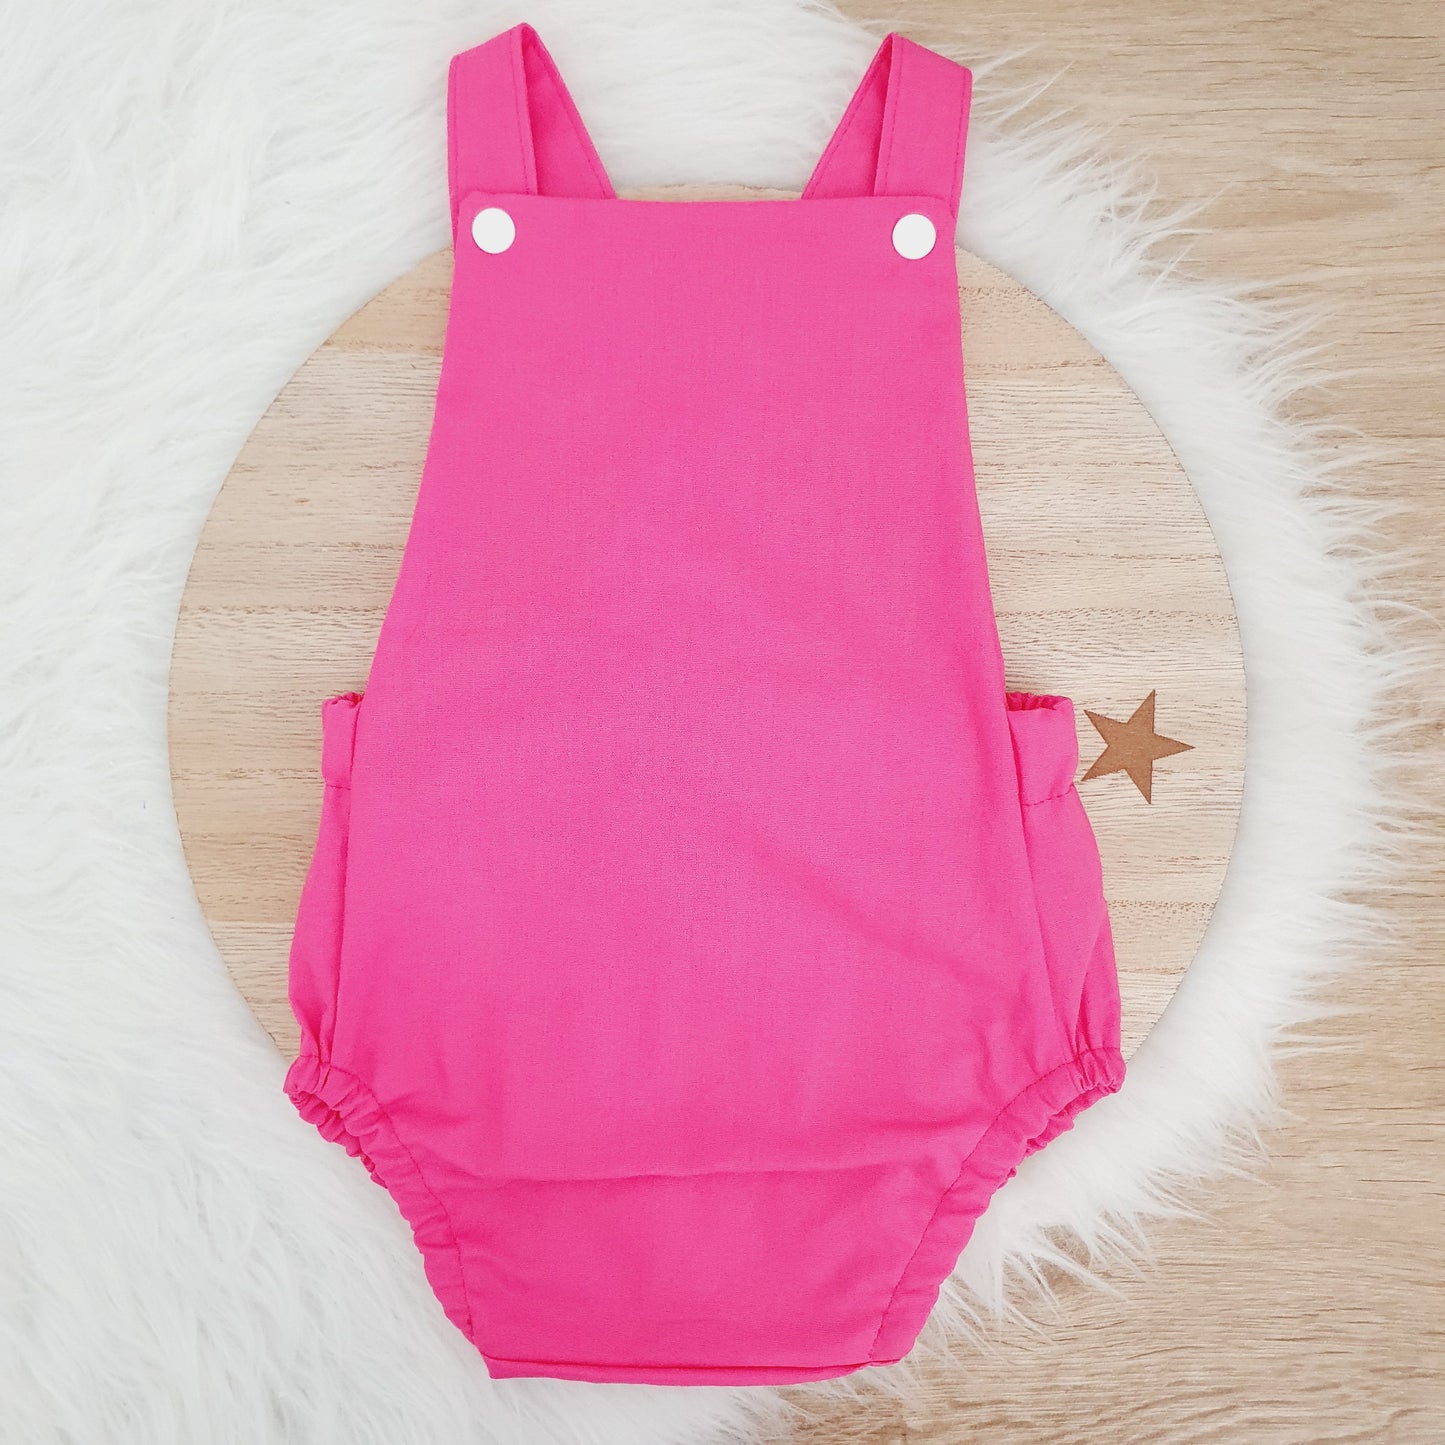 PINK Baby Romper, Handmade Baby Clothing, Size 0 - 1st Birthday Clothing / Cake Smash Outfit - HOT PINK, 9 - 12 months